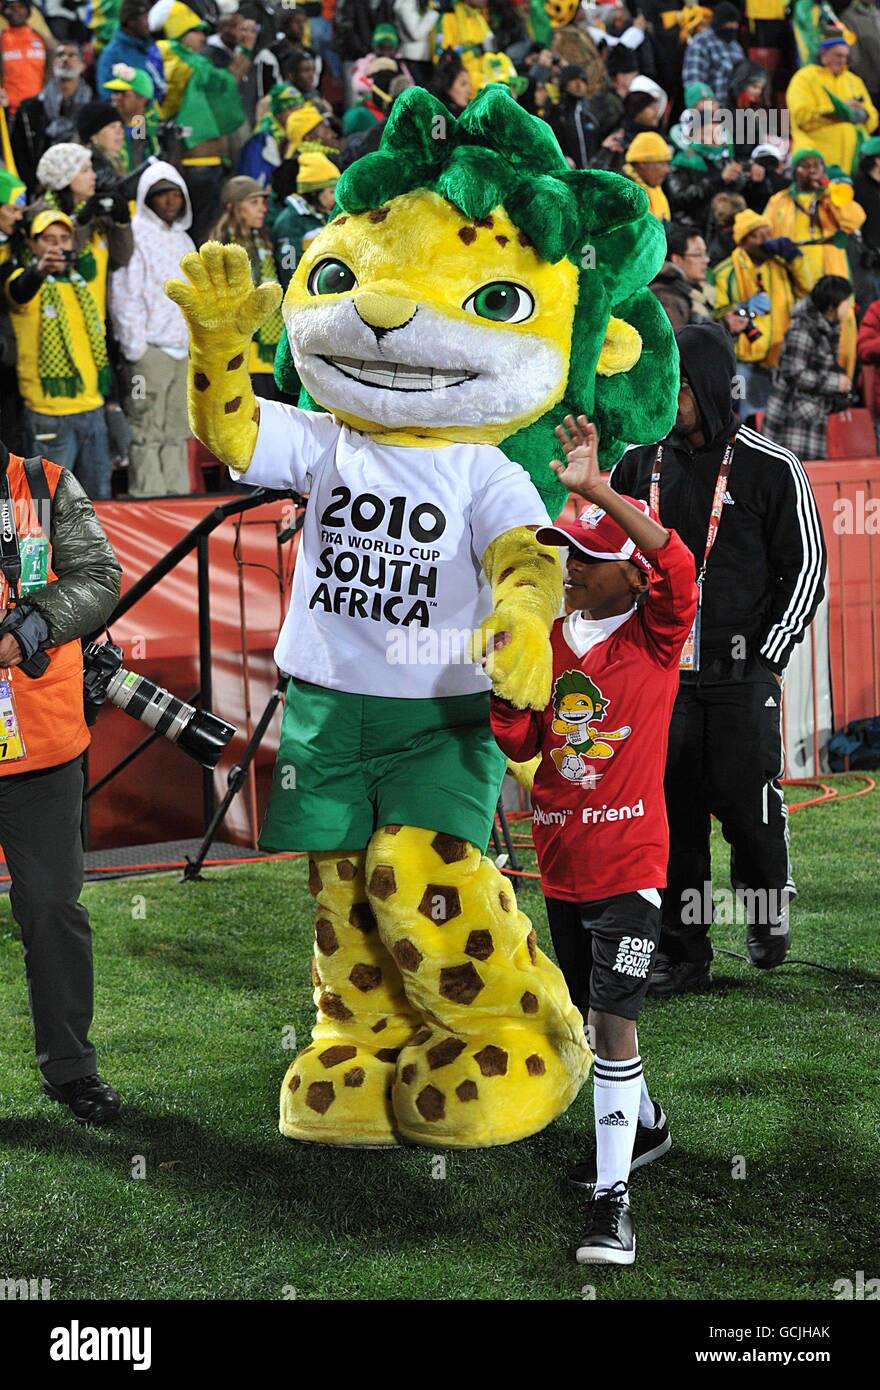 Soccer - 2010 FIFA World Cup South Africa - Group G - Brazil v North Korea - Ellis Park. World cup mascot Zakumi walks around the pitch prior to kick off Stock Photo